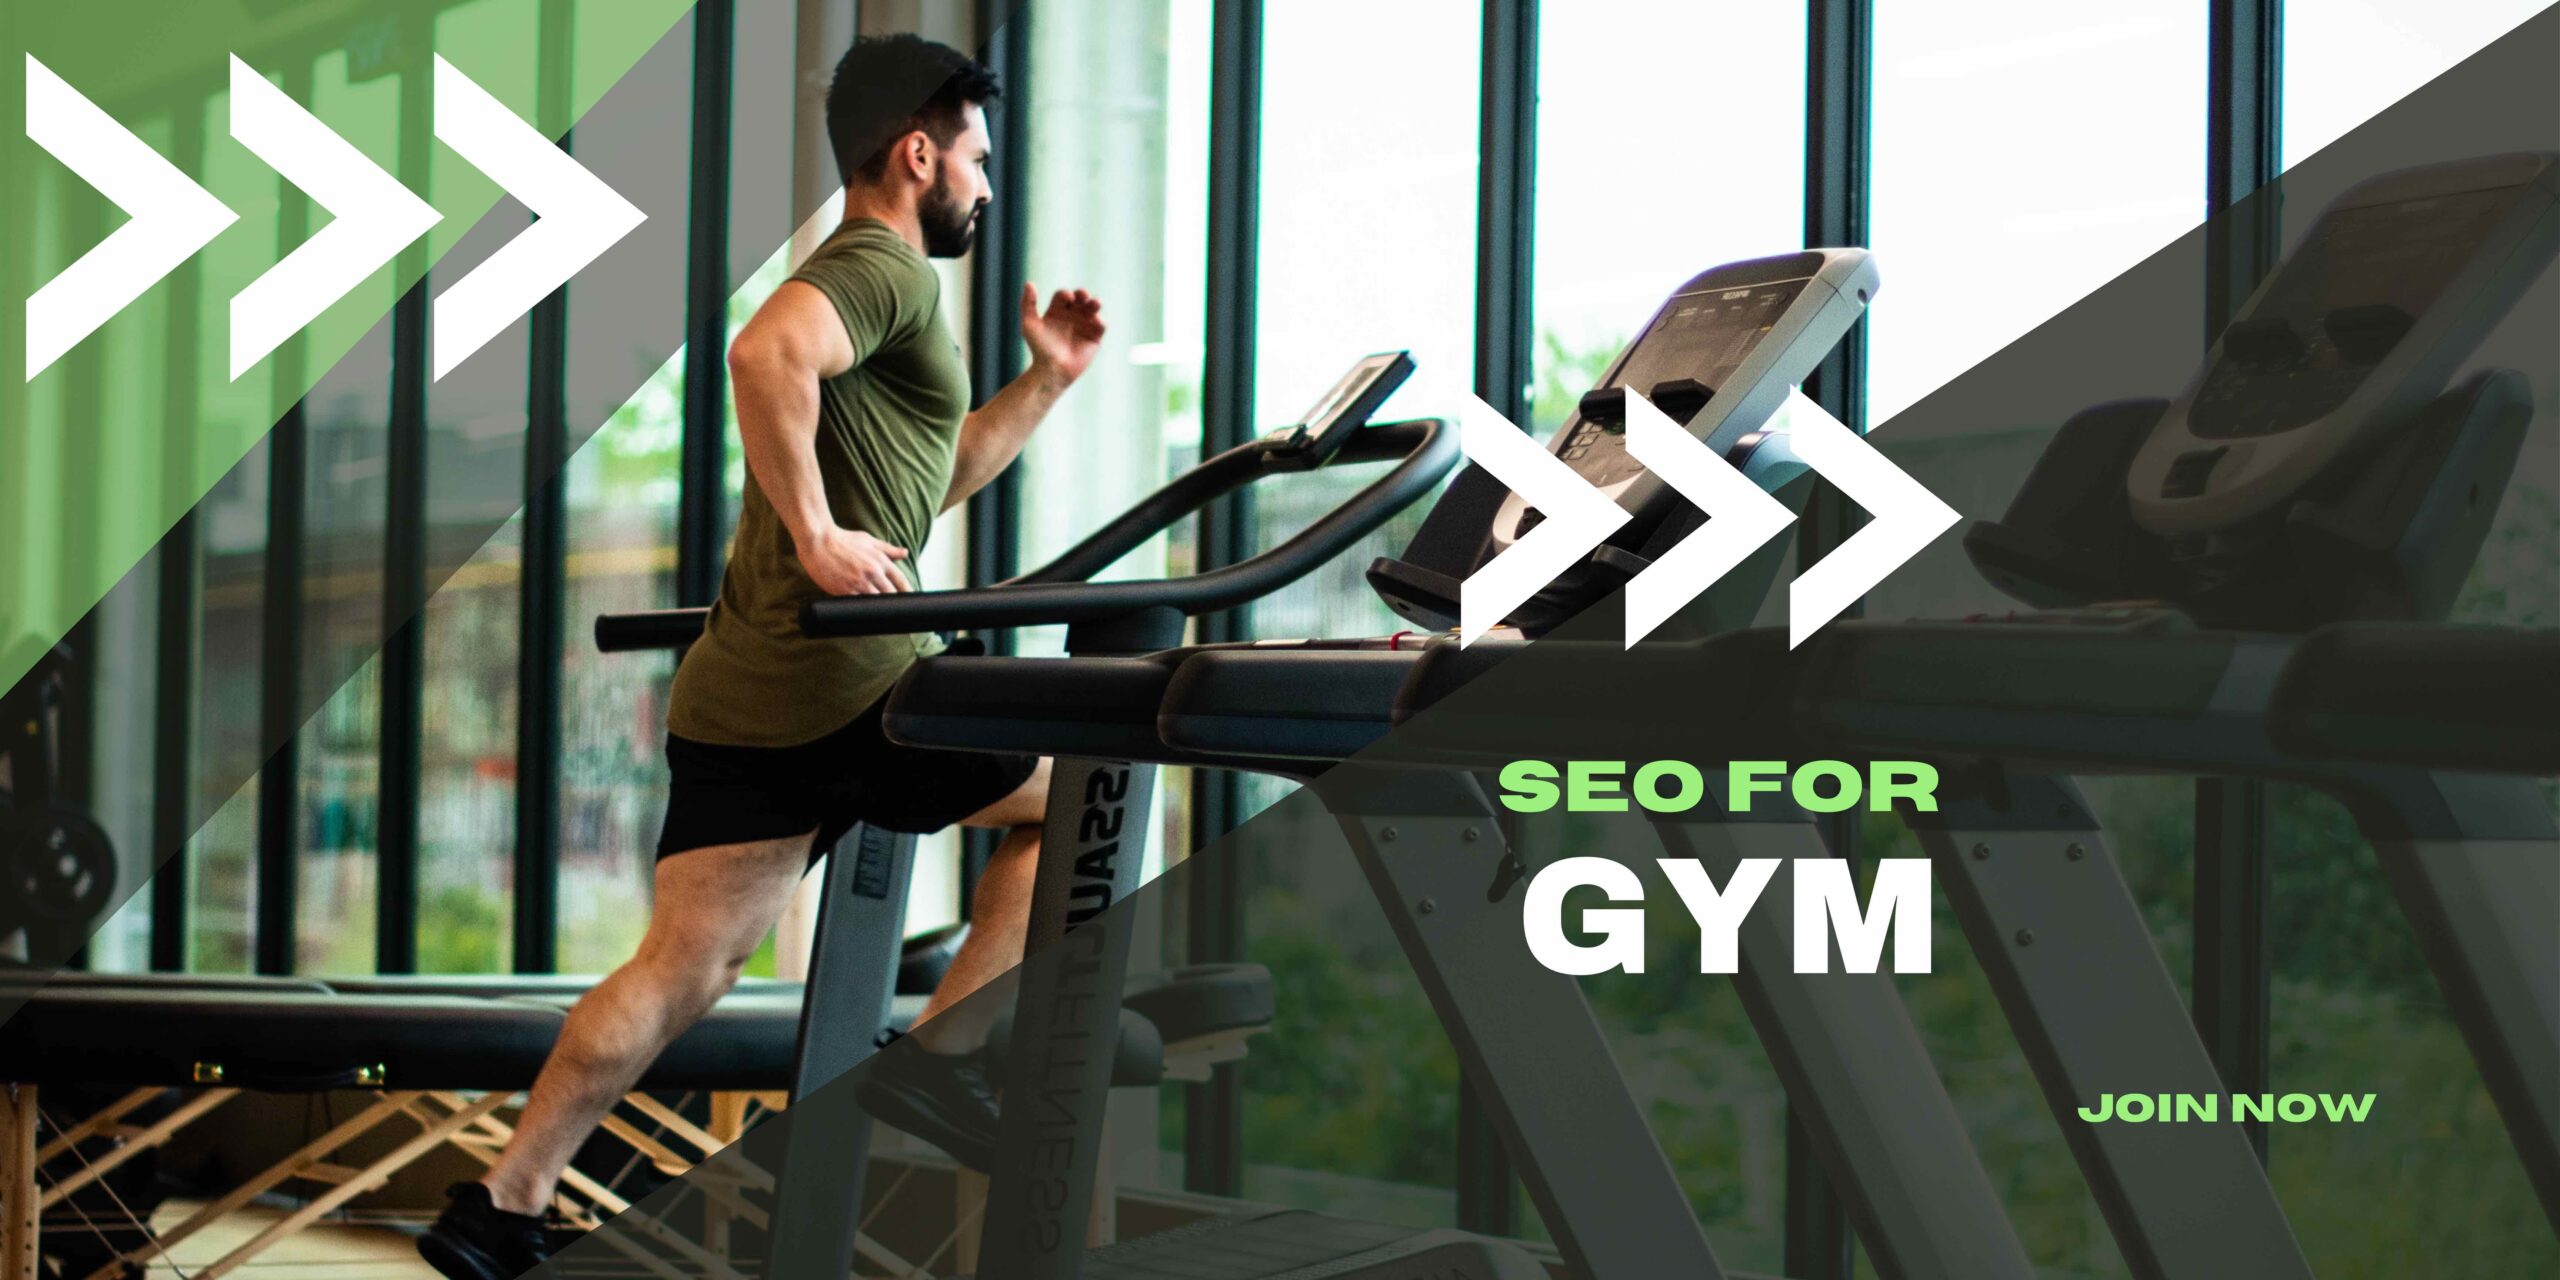 SEO for Gym: Increase Your Online Visibility and Attract More Members